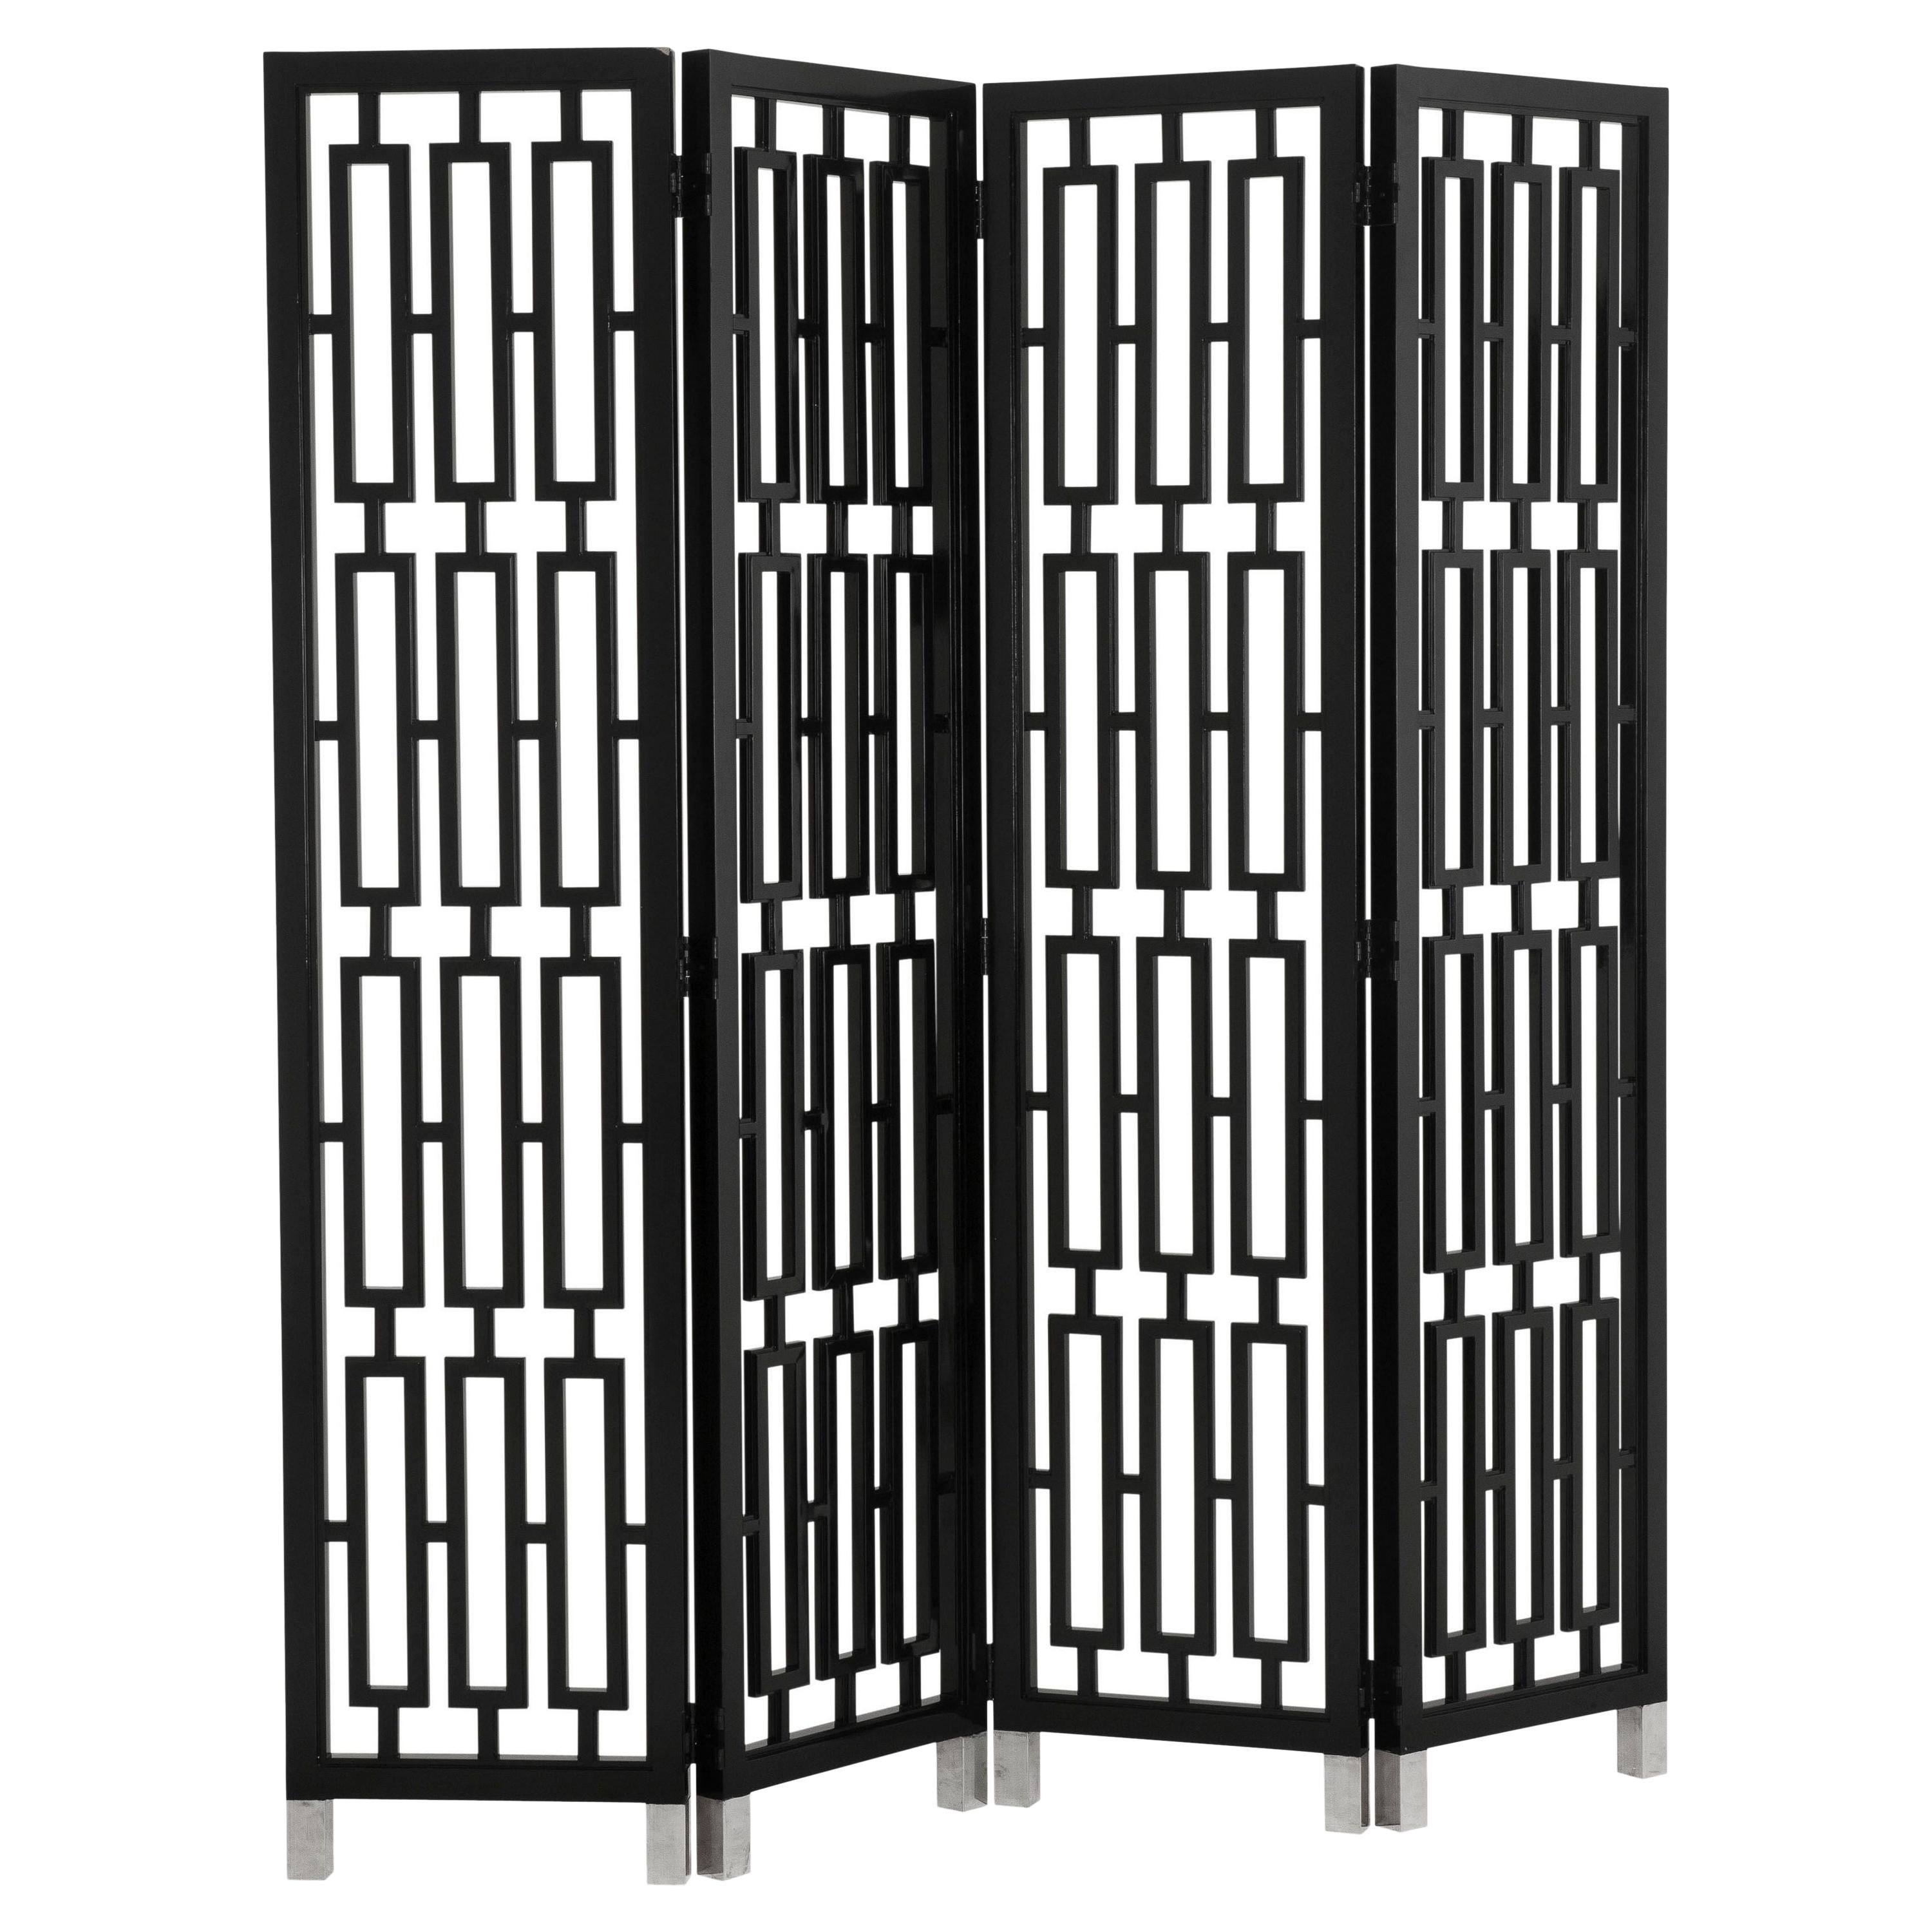 Black Lacquered Wooden and Stainless Steel Folding Screen Divider